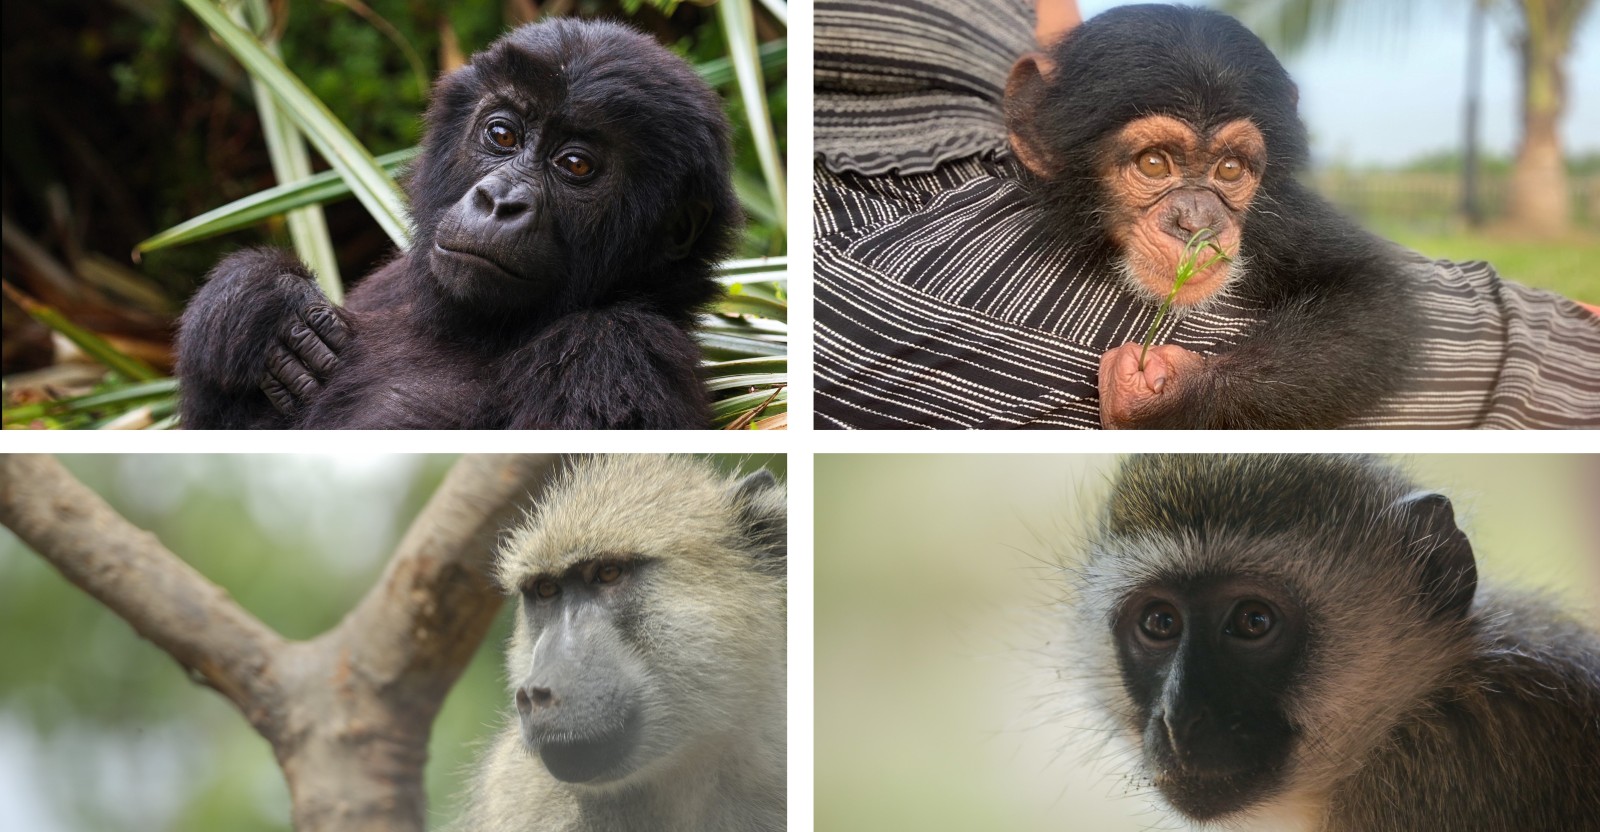 Clockwise from top left: Image of a baby gorilla with jungle background; Baby chimpanzee being held by a rescuer, a baboon in a tree, and a vervet monkey.